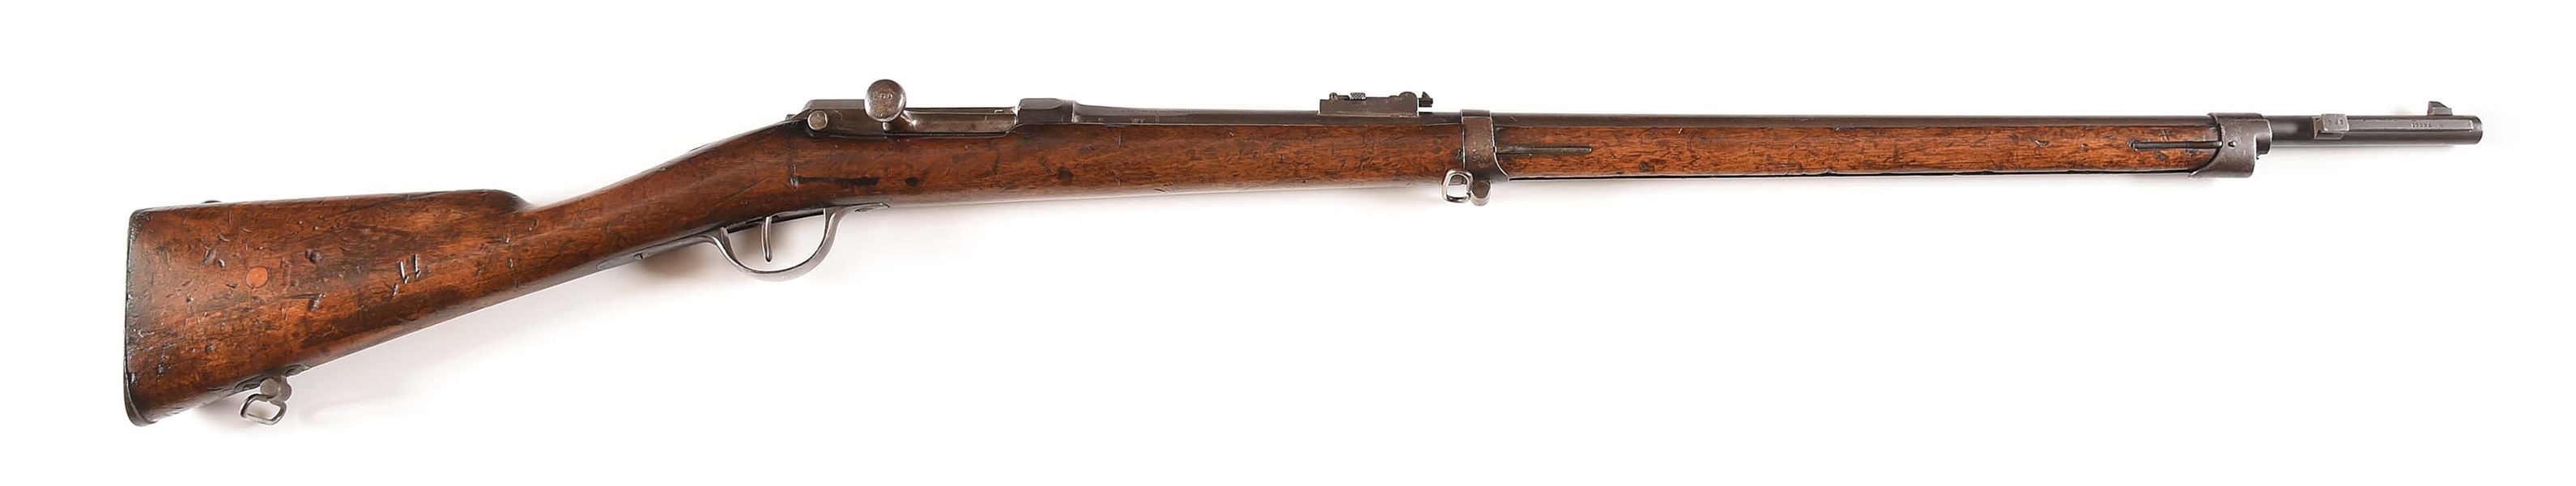 (A) FRENCH CHASSEPOT KYNOCH CONVERSION BOLT ACTION RIFLE 